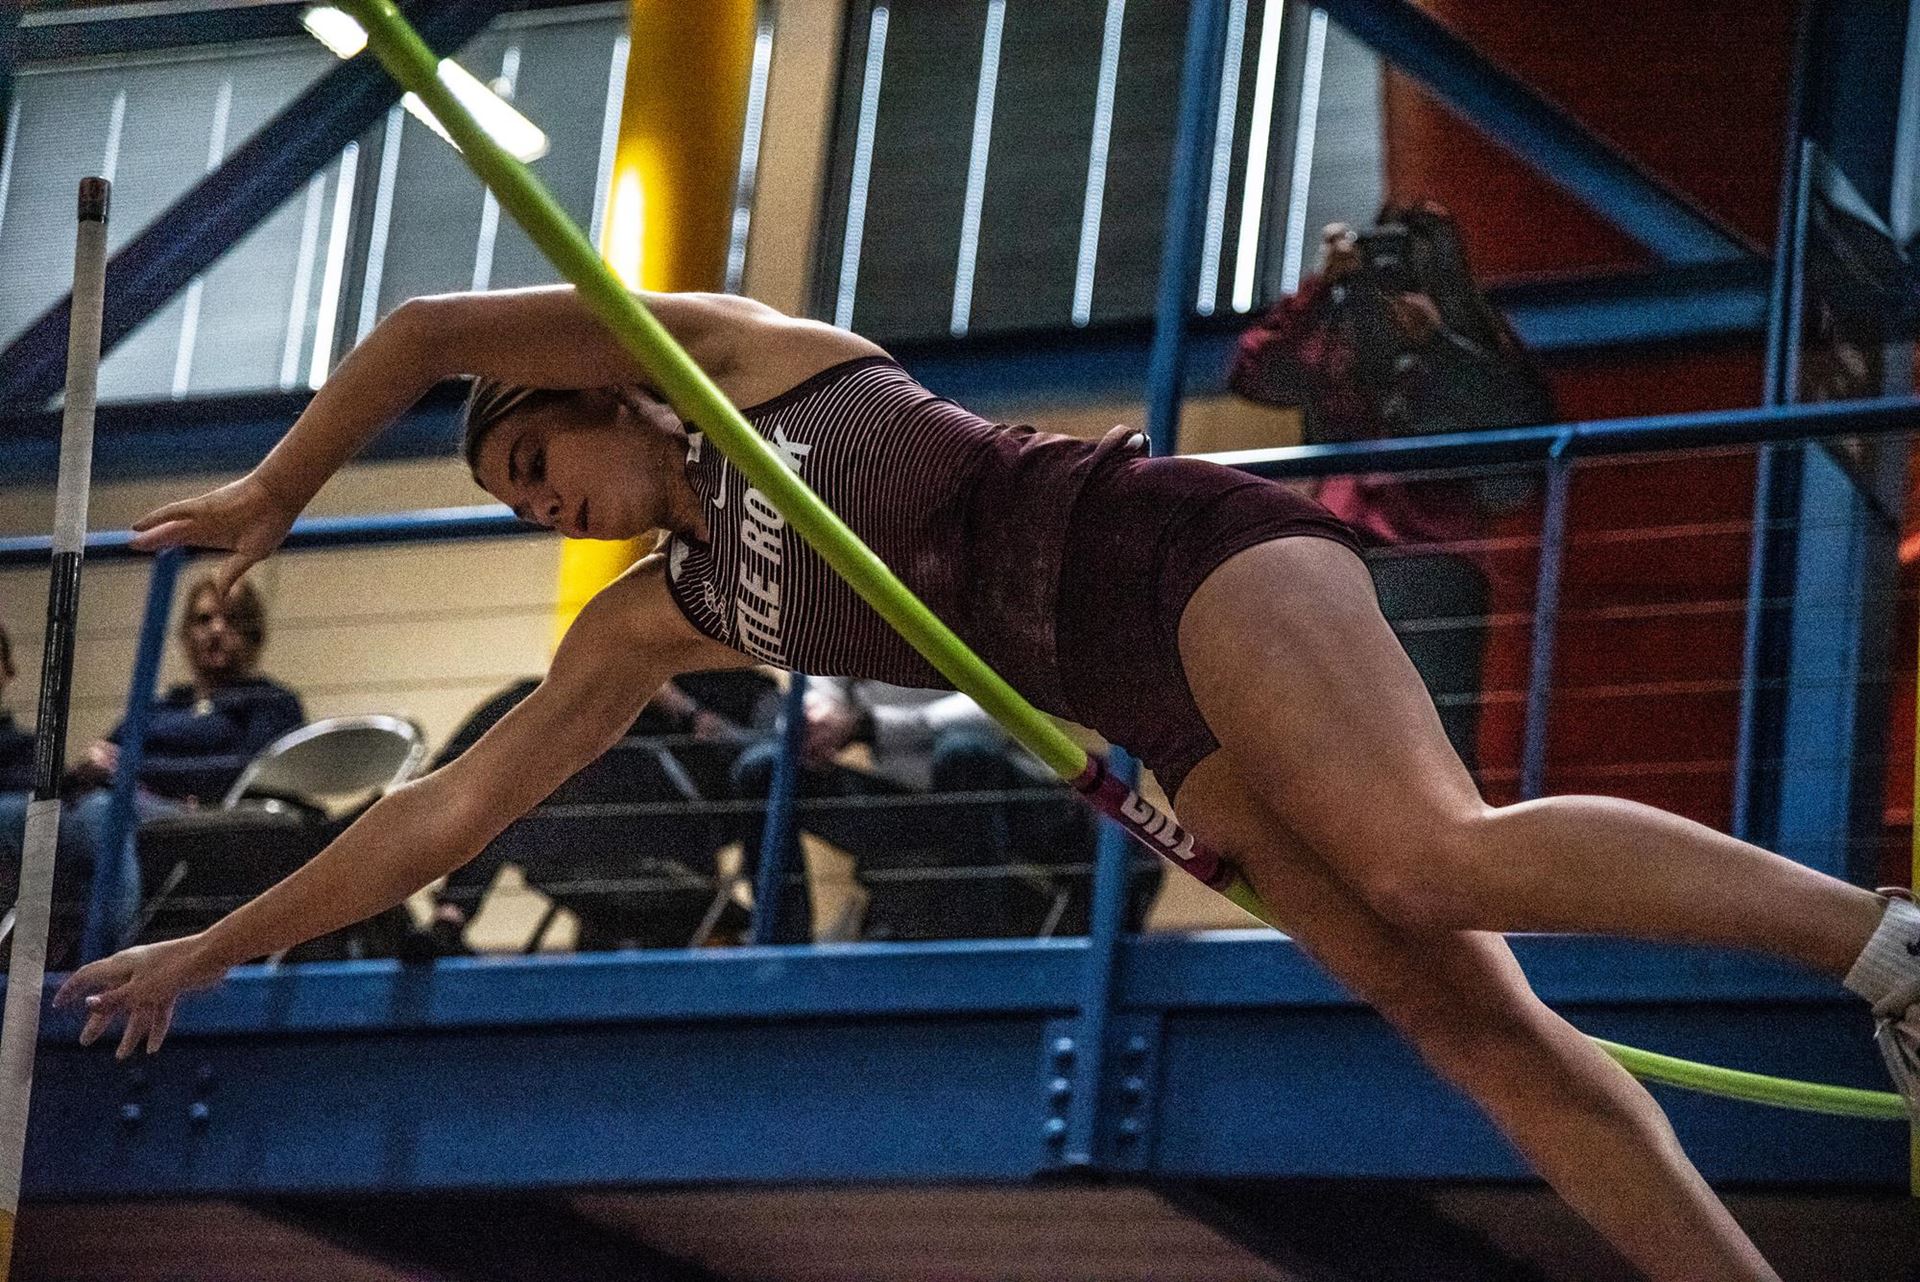 Tricia Pierce registered a height of 11-5.75 (3.50m) in the pole vault at the Jan. 17, 2020 track and field invitational in Fayetteville.